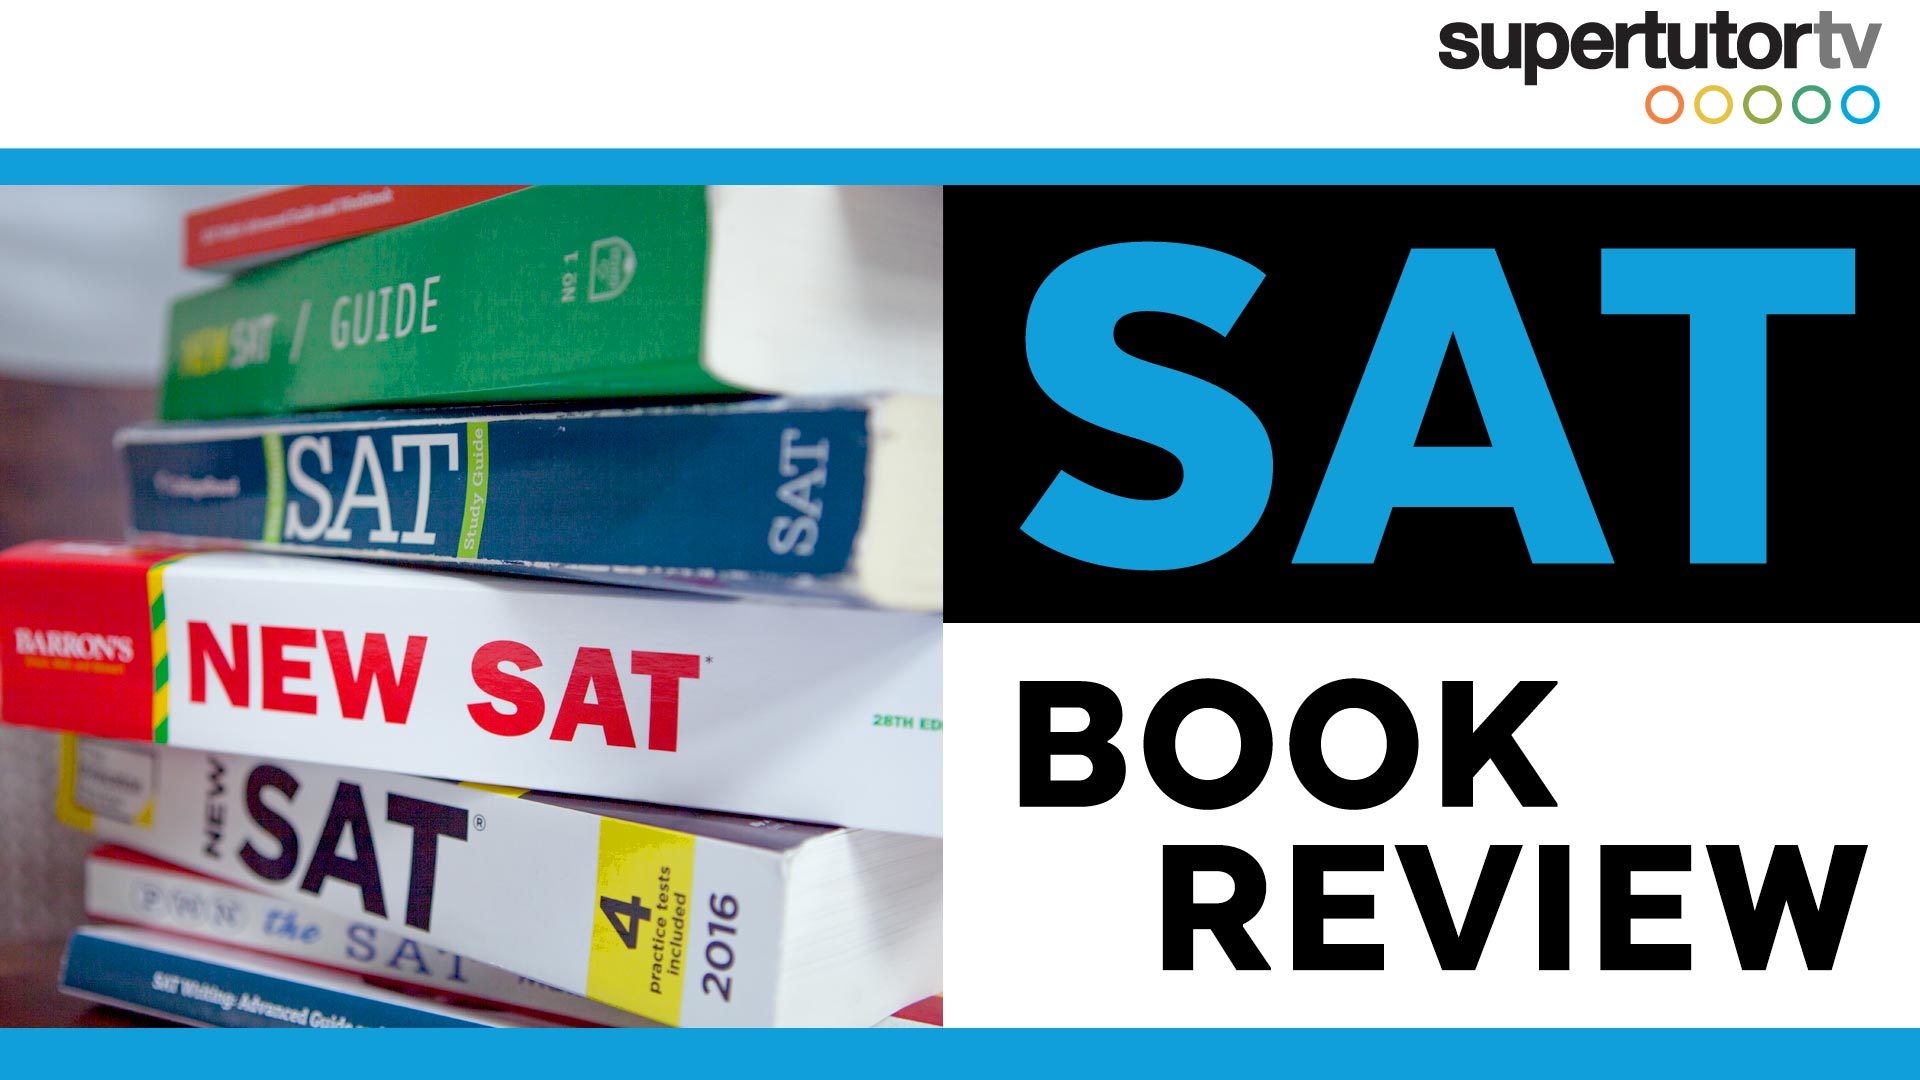 SAT Book Review The BEST SAT books for selfstudy! SupertutorTV